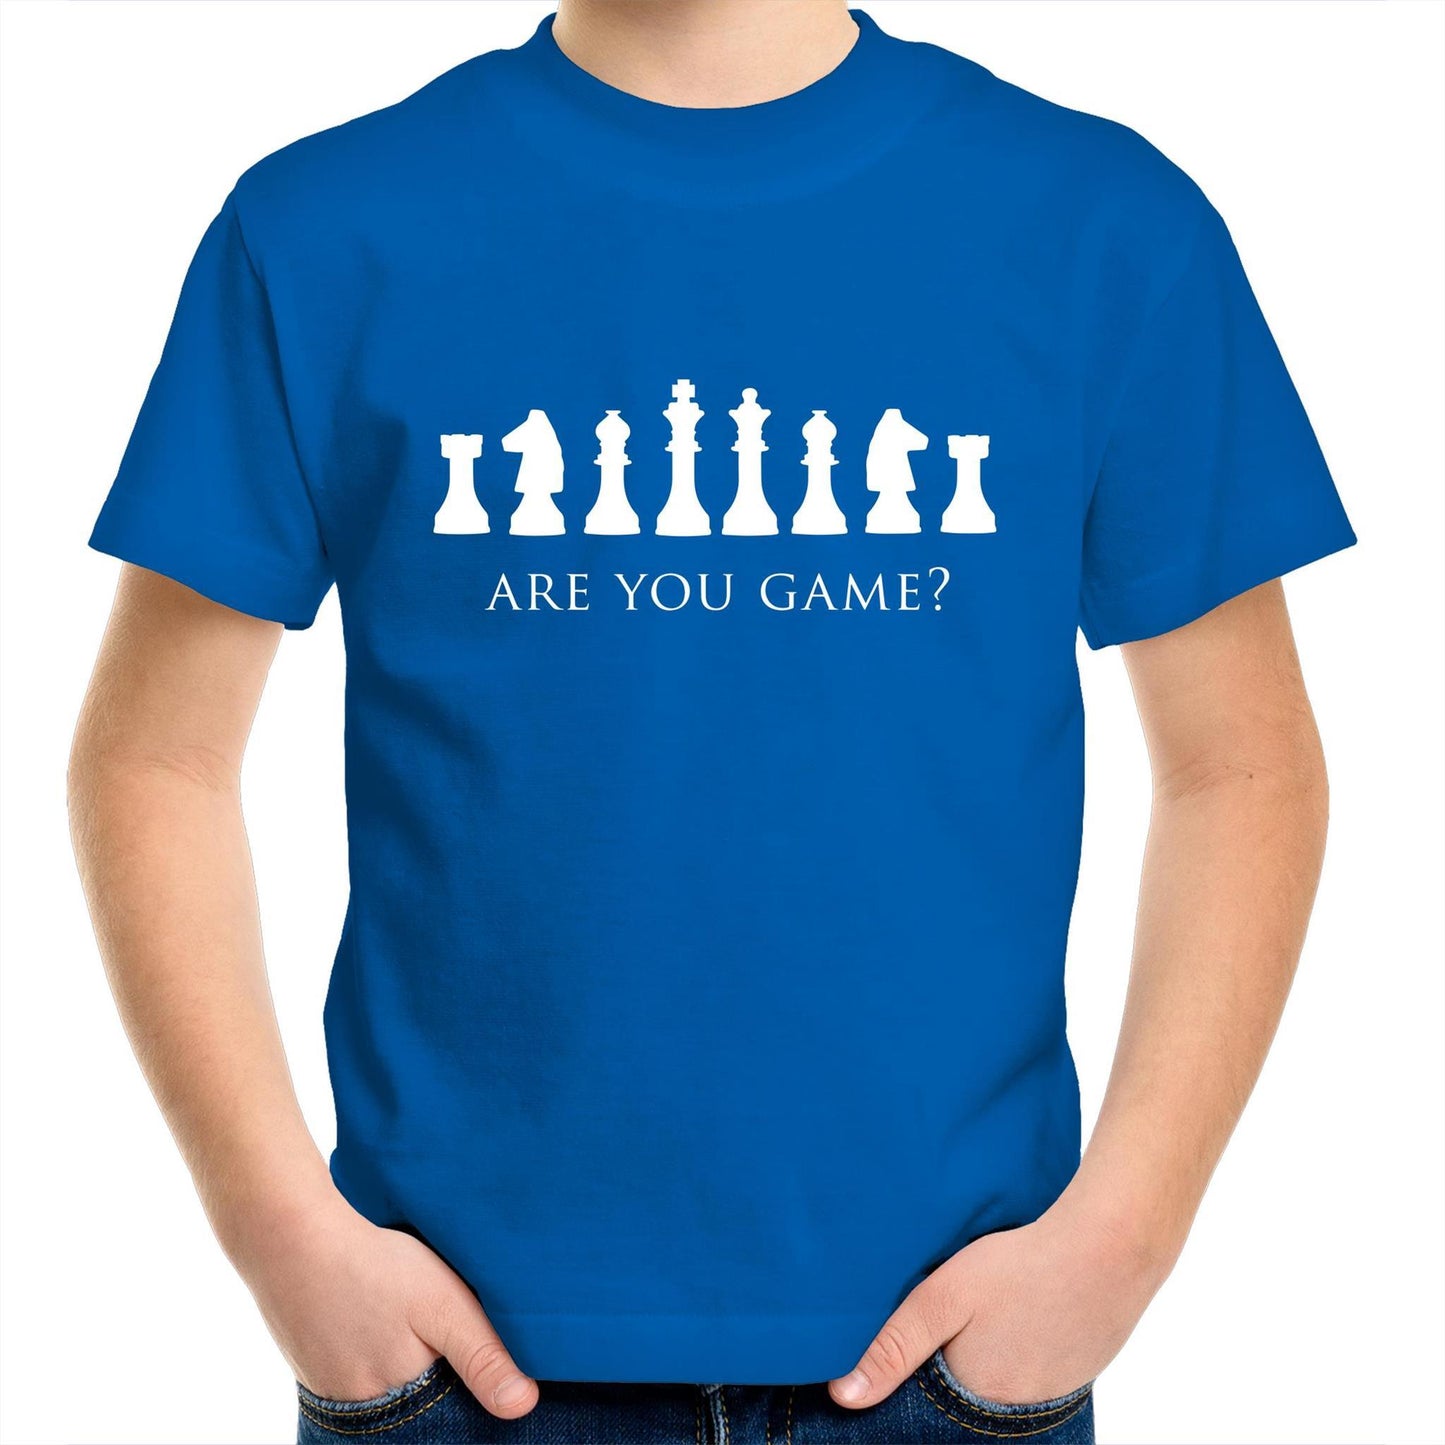 Are You Game - Kids Youth Crew T-shirt Bright Royal Kids Youth T-shirt Chess